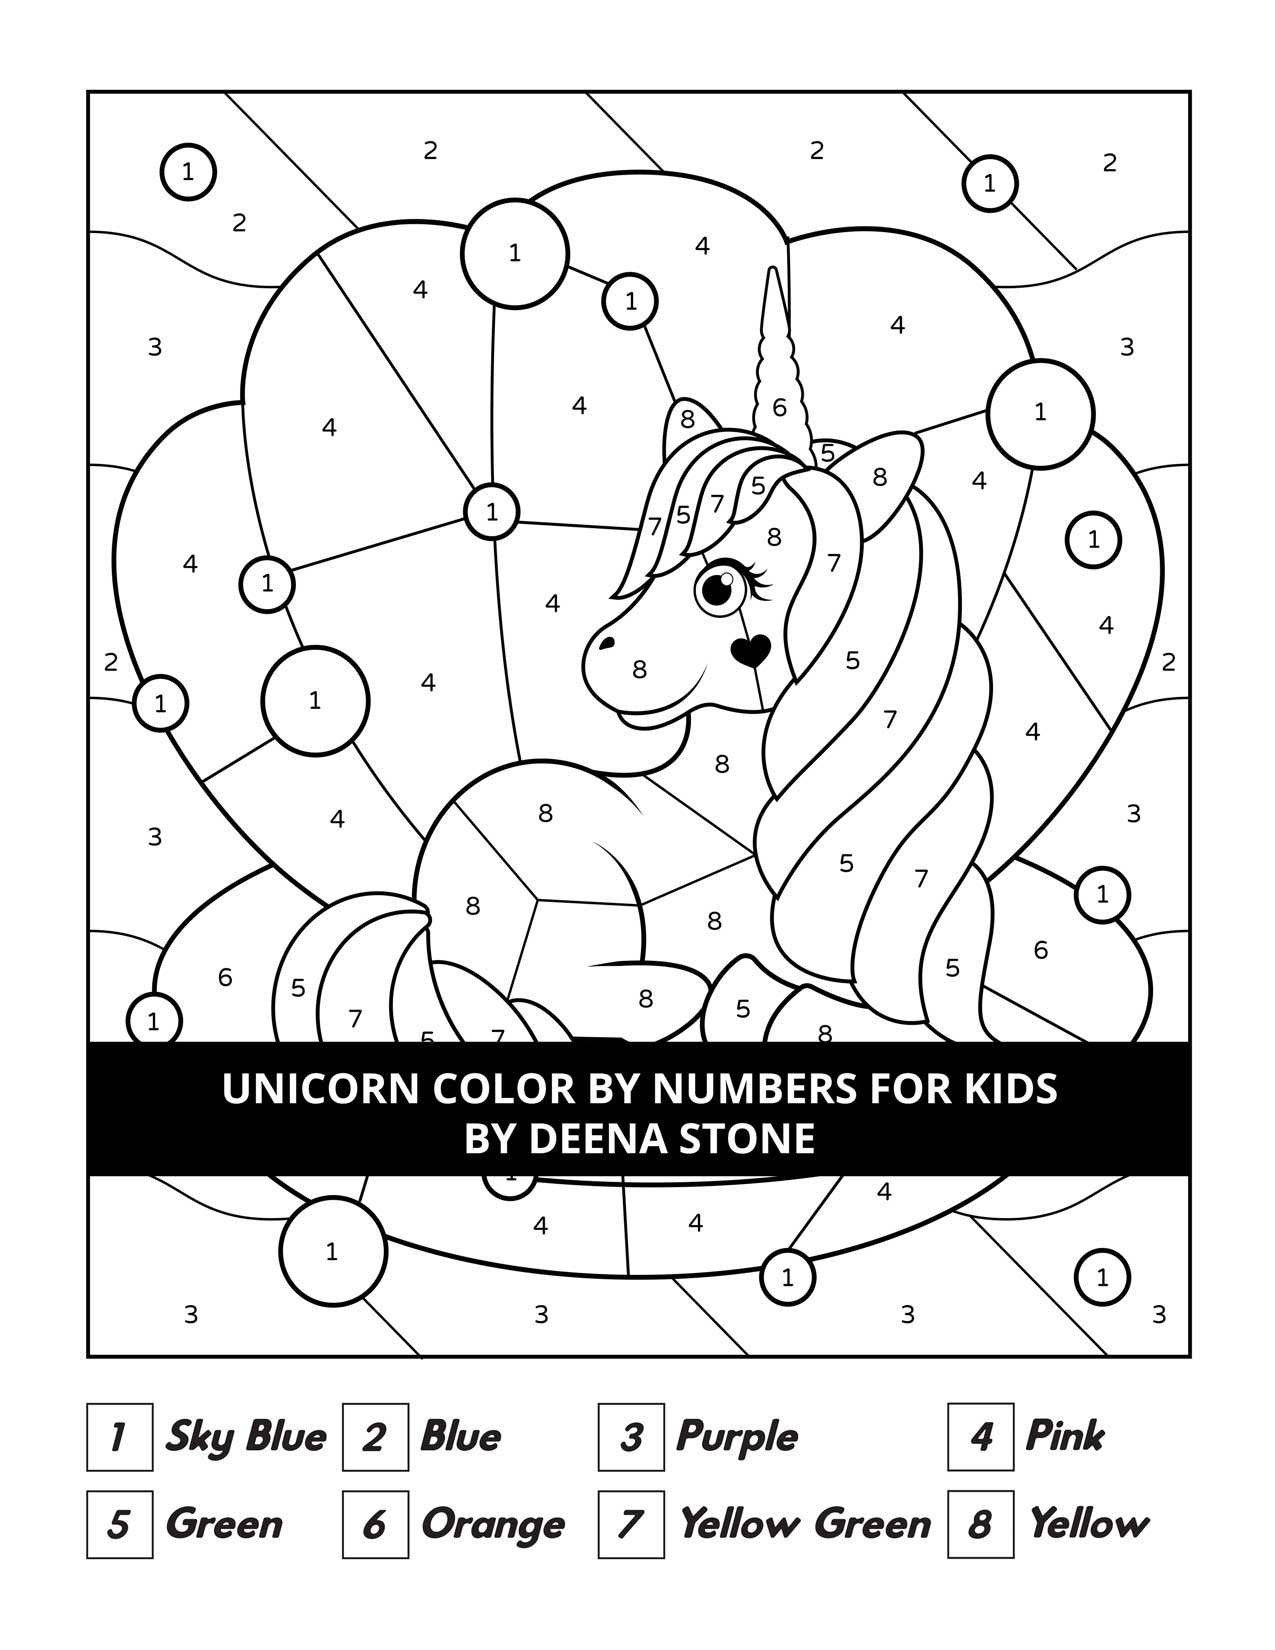 Unicorn Color By Numbers For Kids - Deena Stone